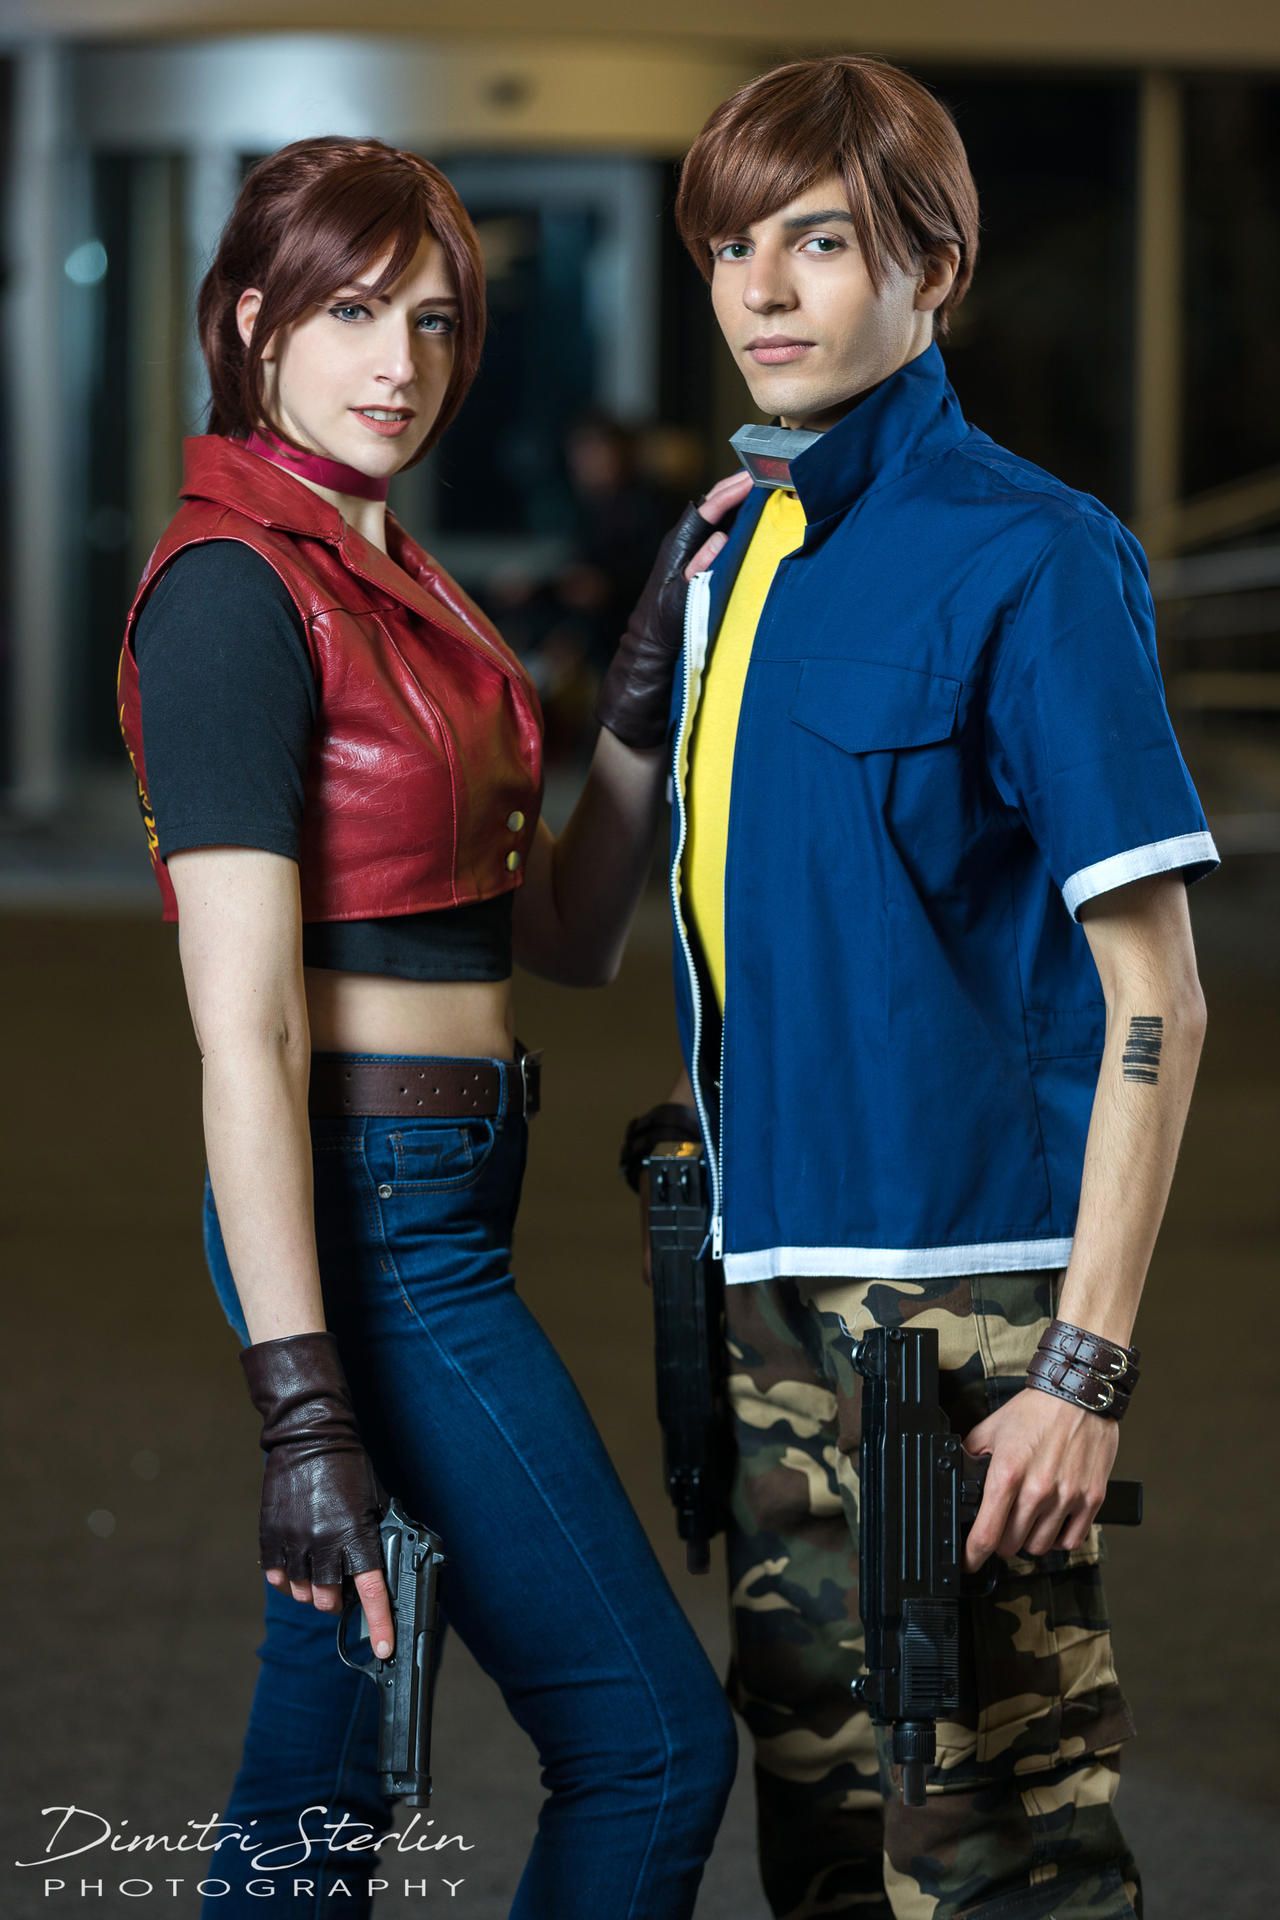 Claire Redfield (Resident Evil Code: Veronica) By Sheenah : r/cosplayers